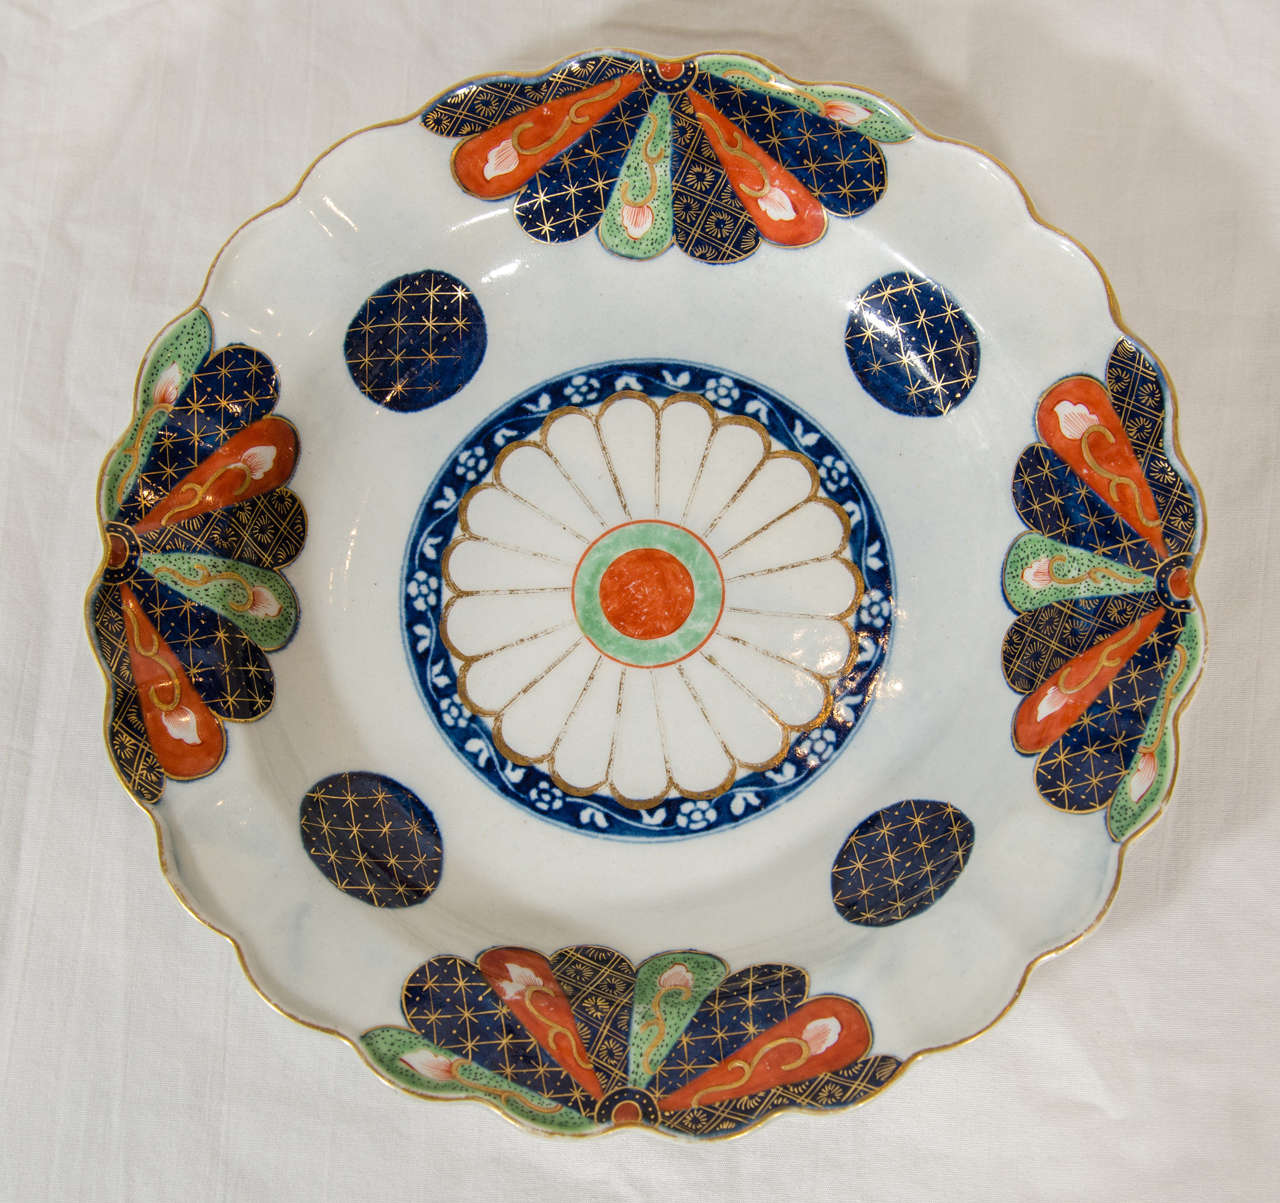 A pair of 18th century Dr. Wall Worcester soft-paste porcelain dishes, decorated in Imari style with the 